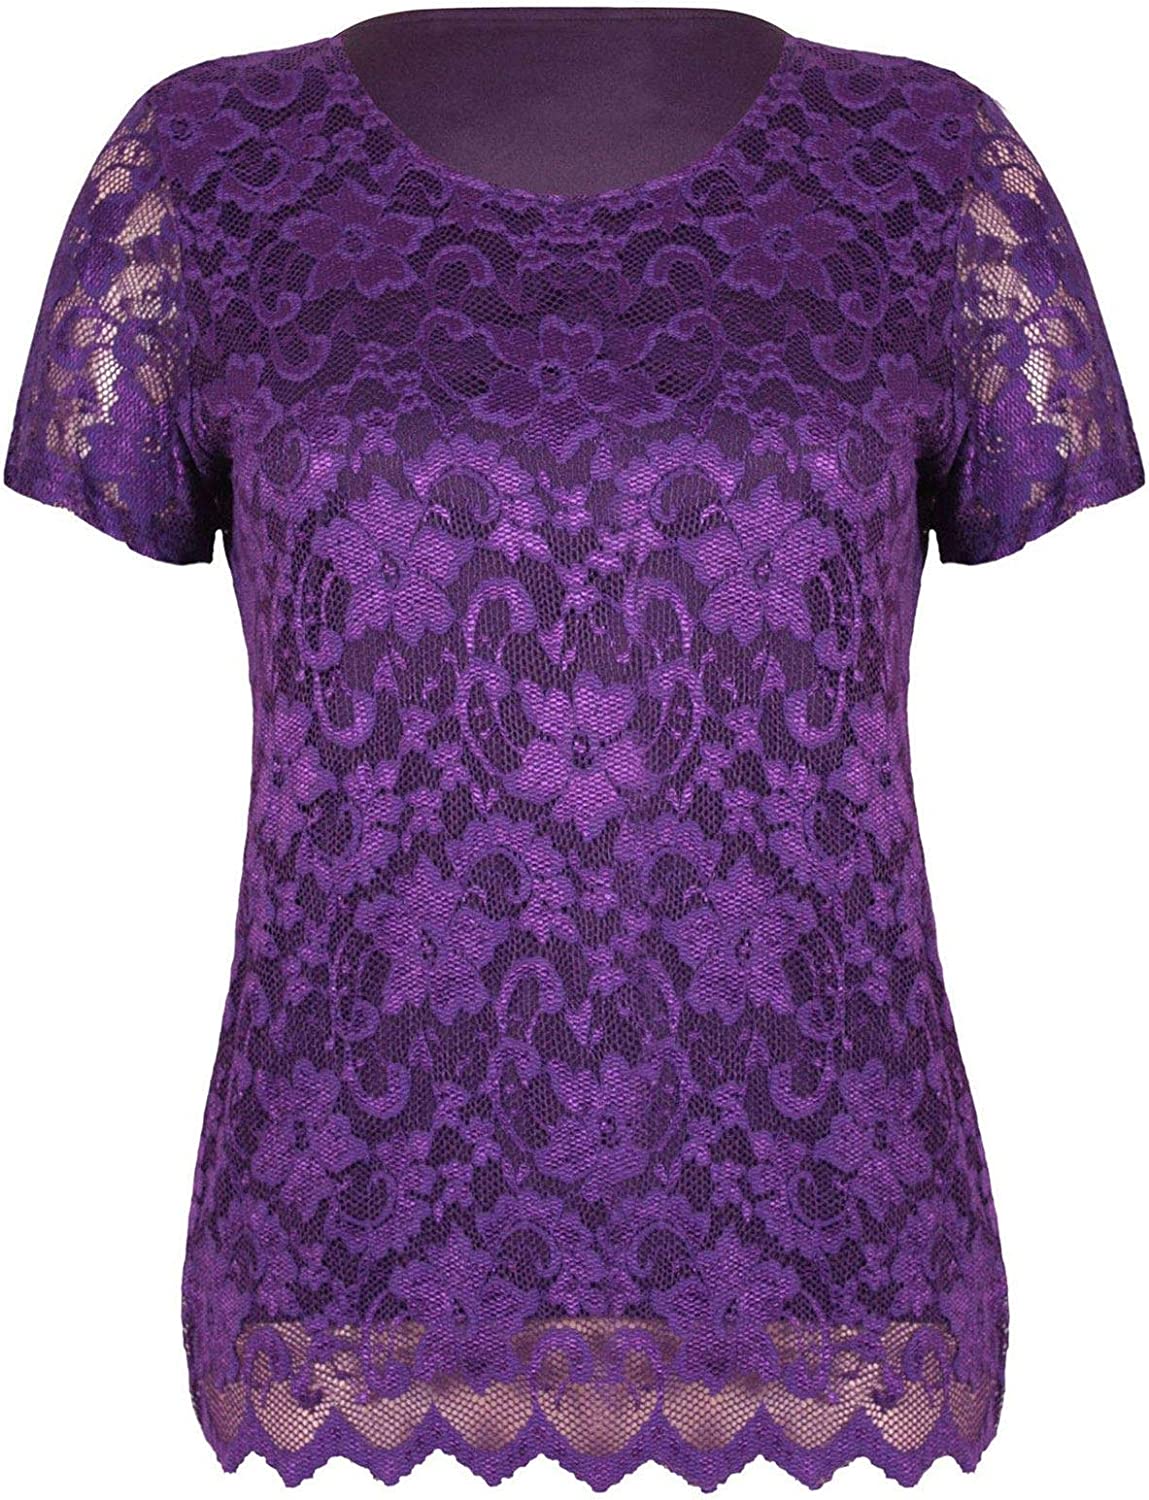 Ladies Short Sleeve Floral Lace Blouse Womens Fancy Stretchy Party T Shirt Top